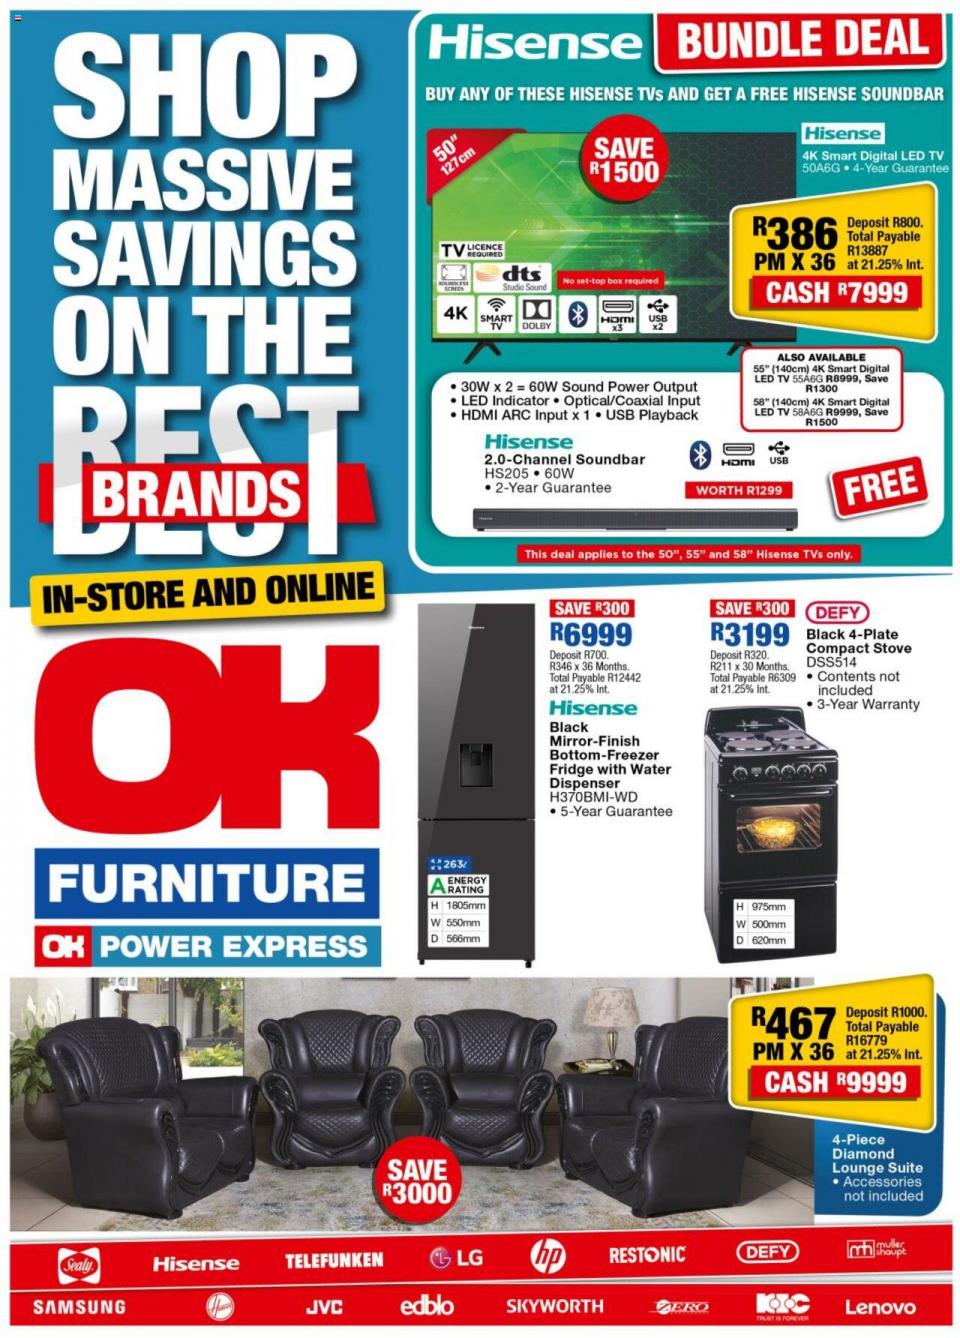 OK Furniture Specials 3 – 15 May 2022